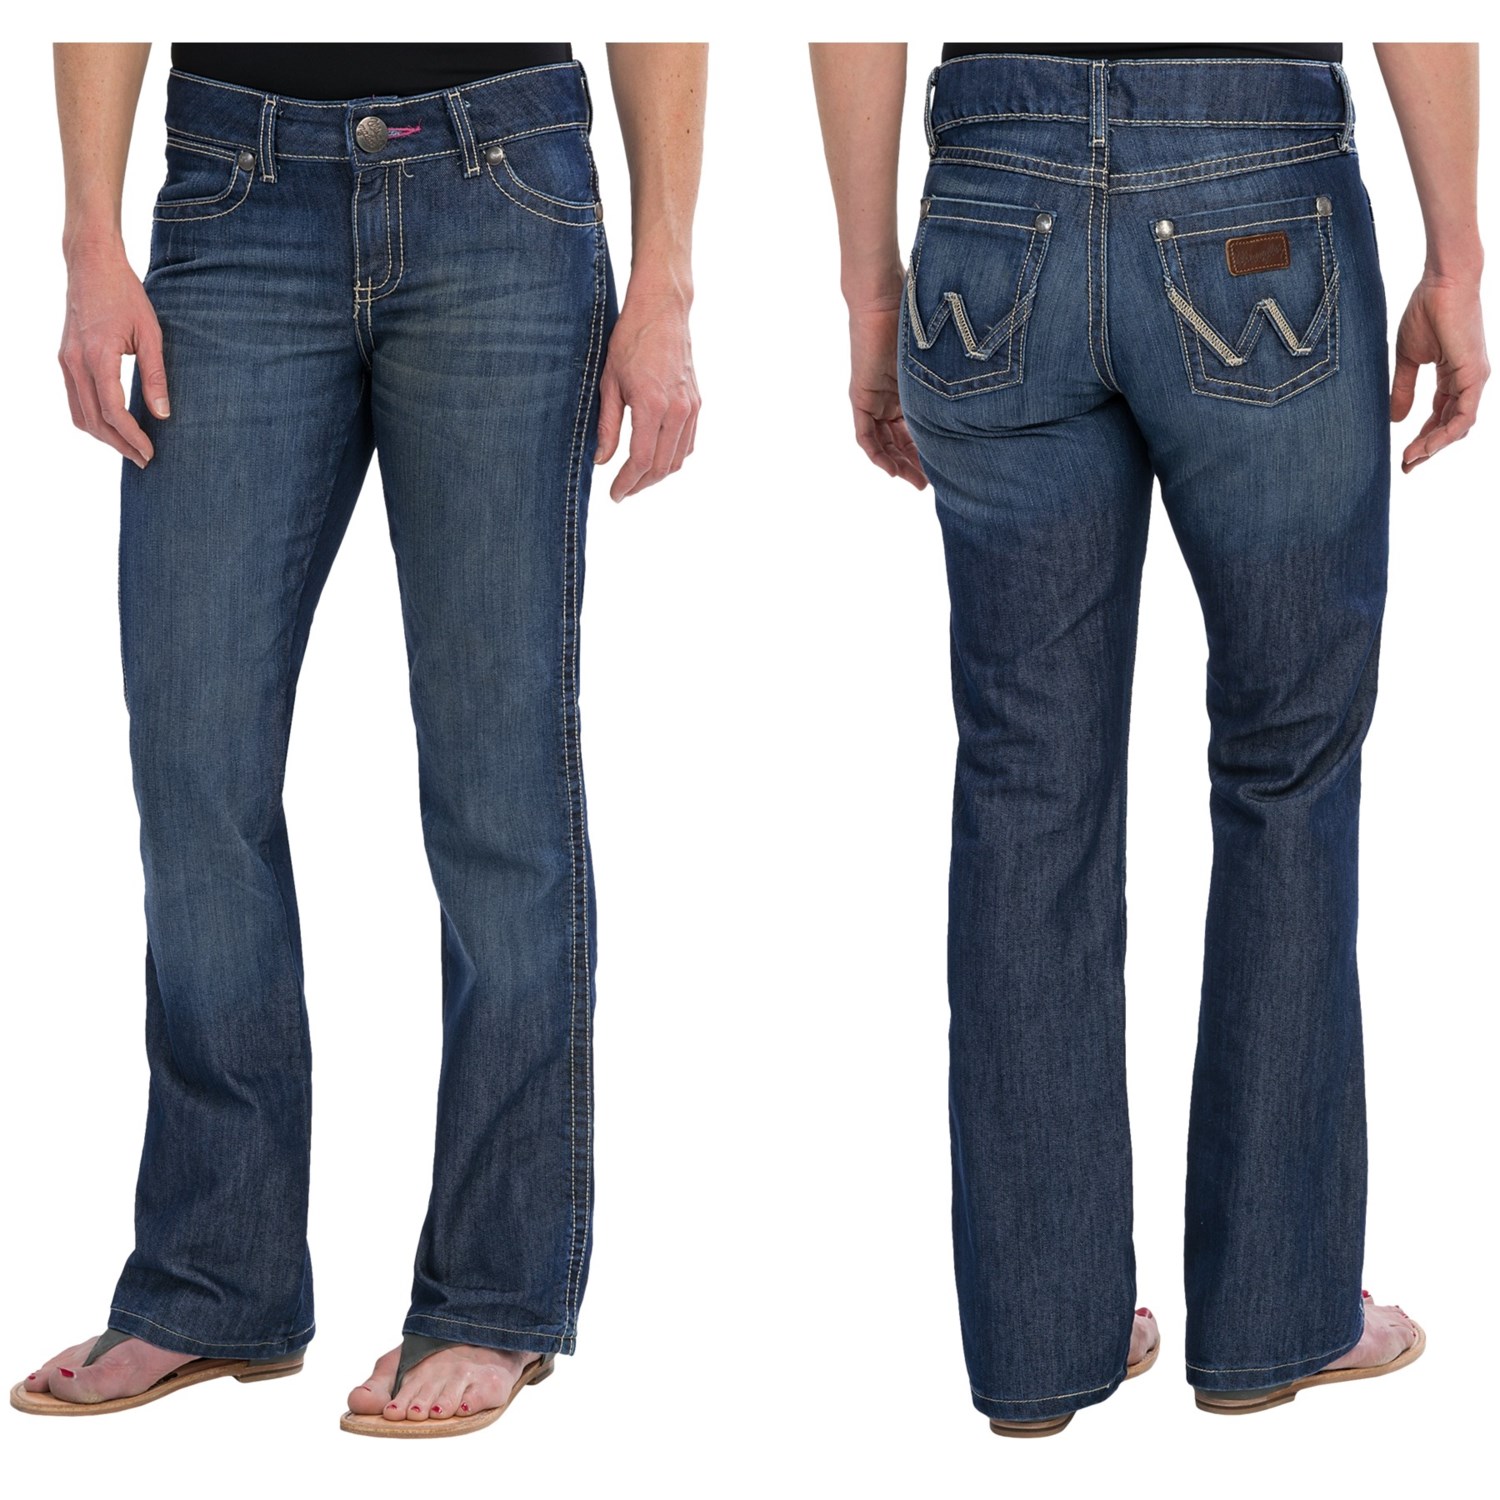 Wrangler Mae Premium Patch Jean (For Women) - Save 50%